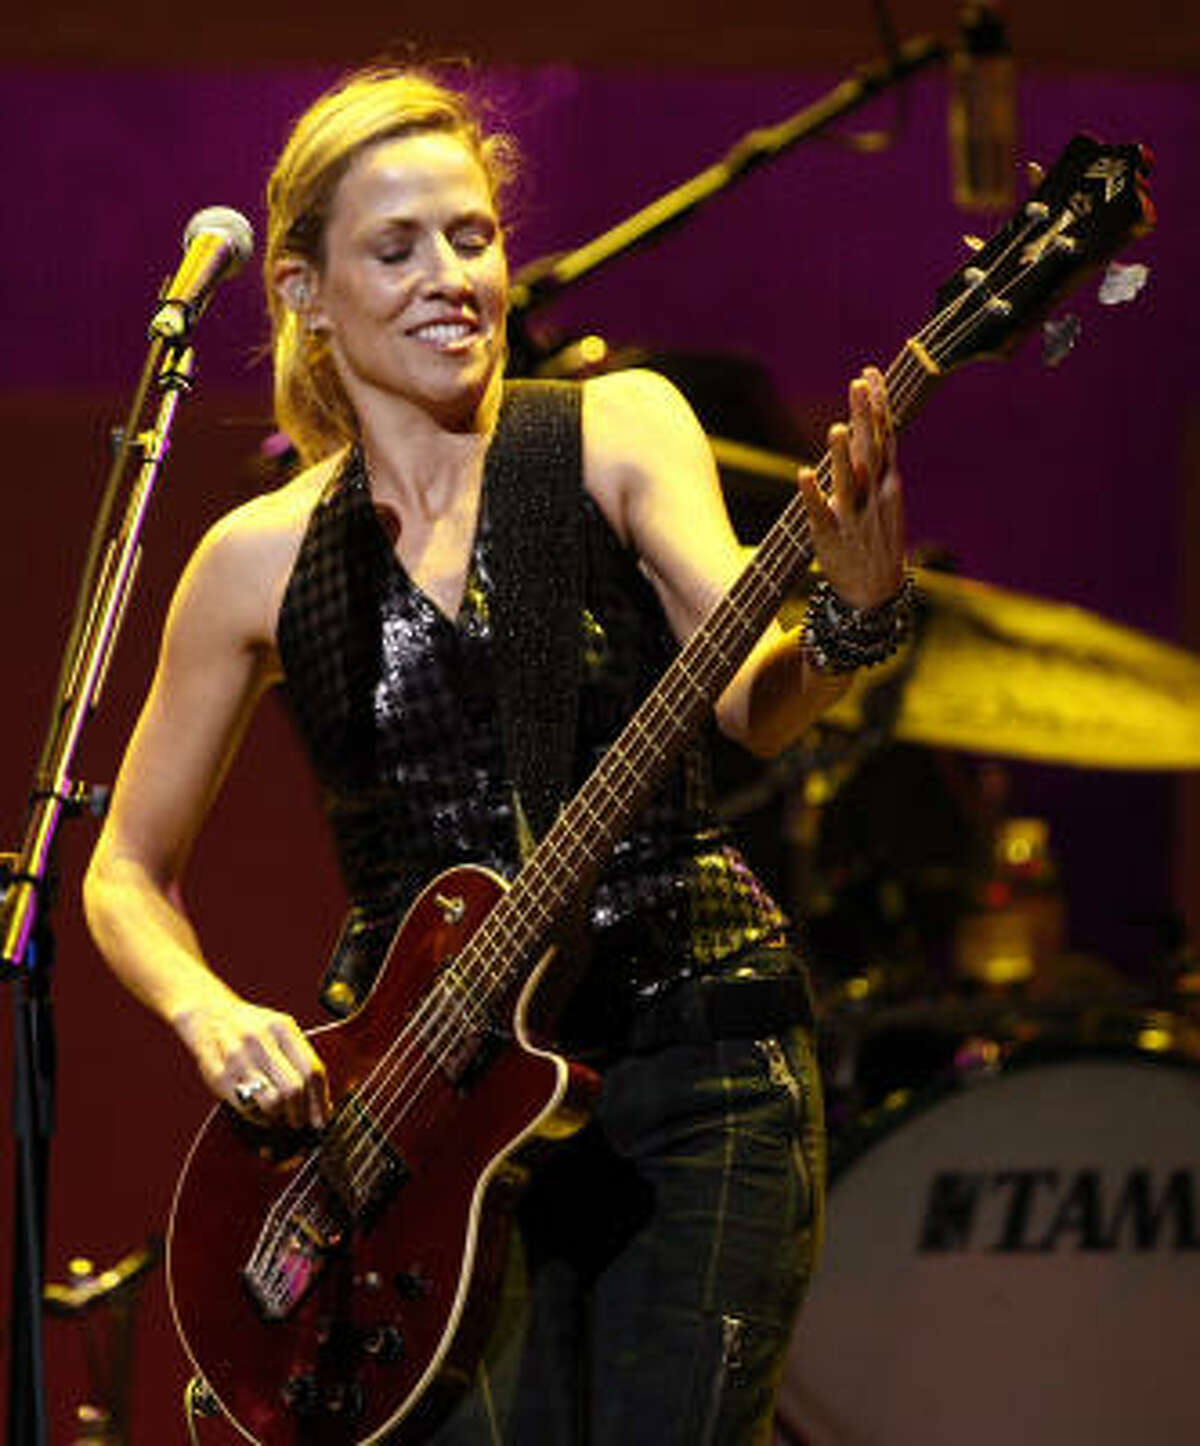 Singer Sheryl Crow was diagnosed in 2006, at the age of 44.